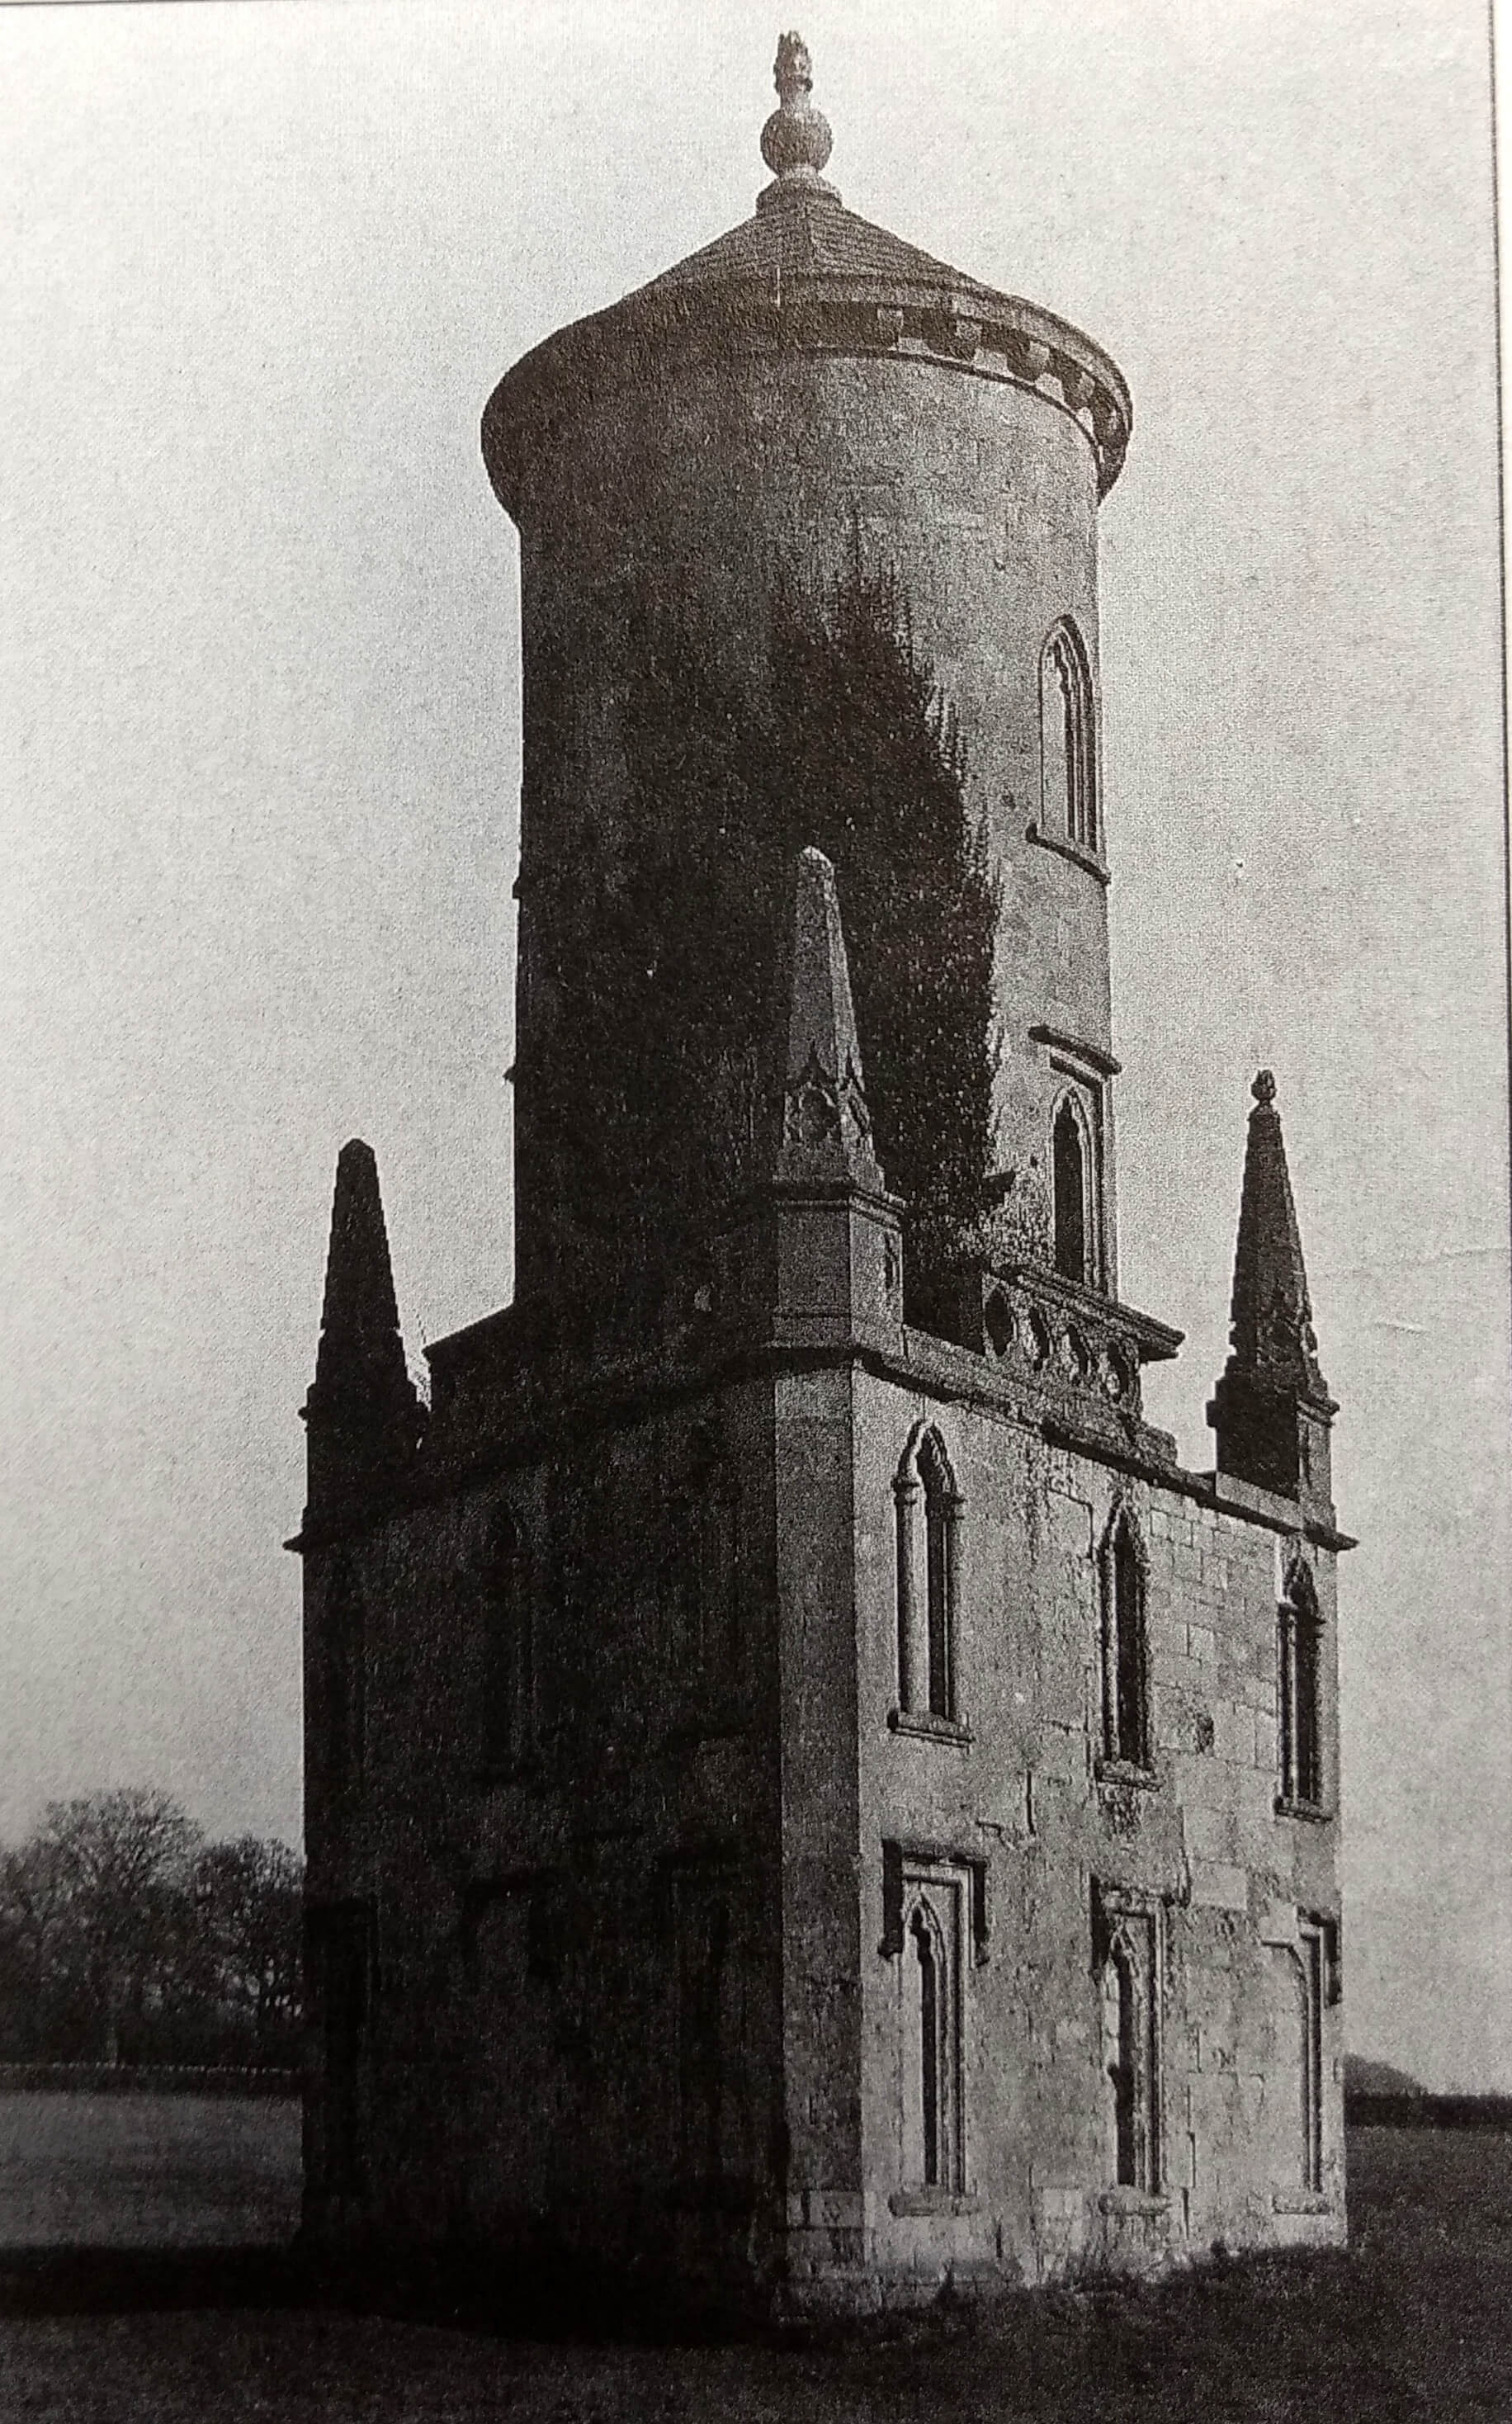 The Monument about 1905